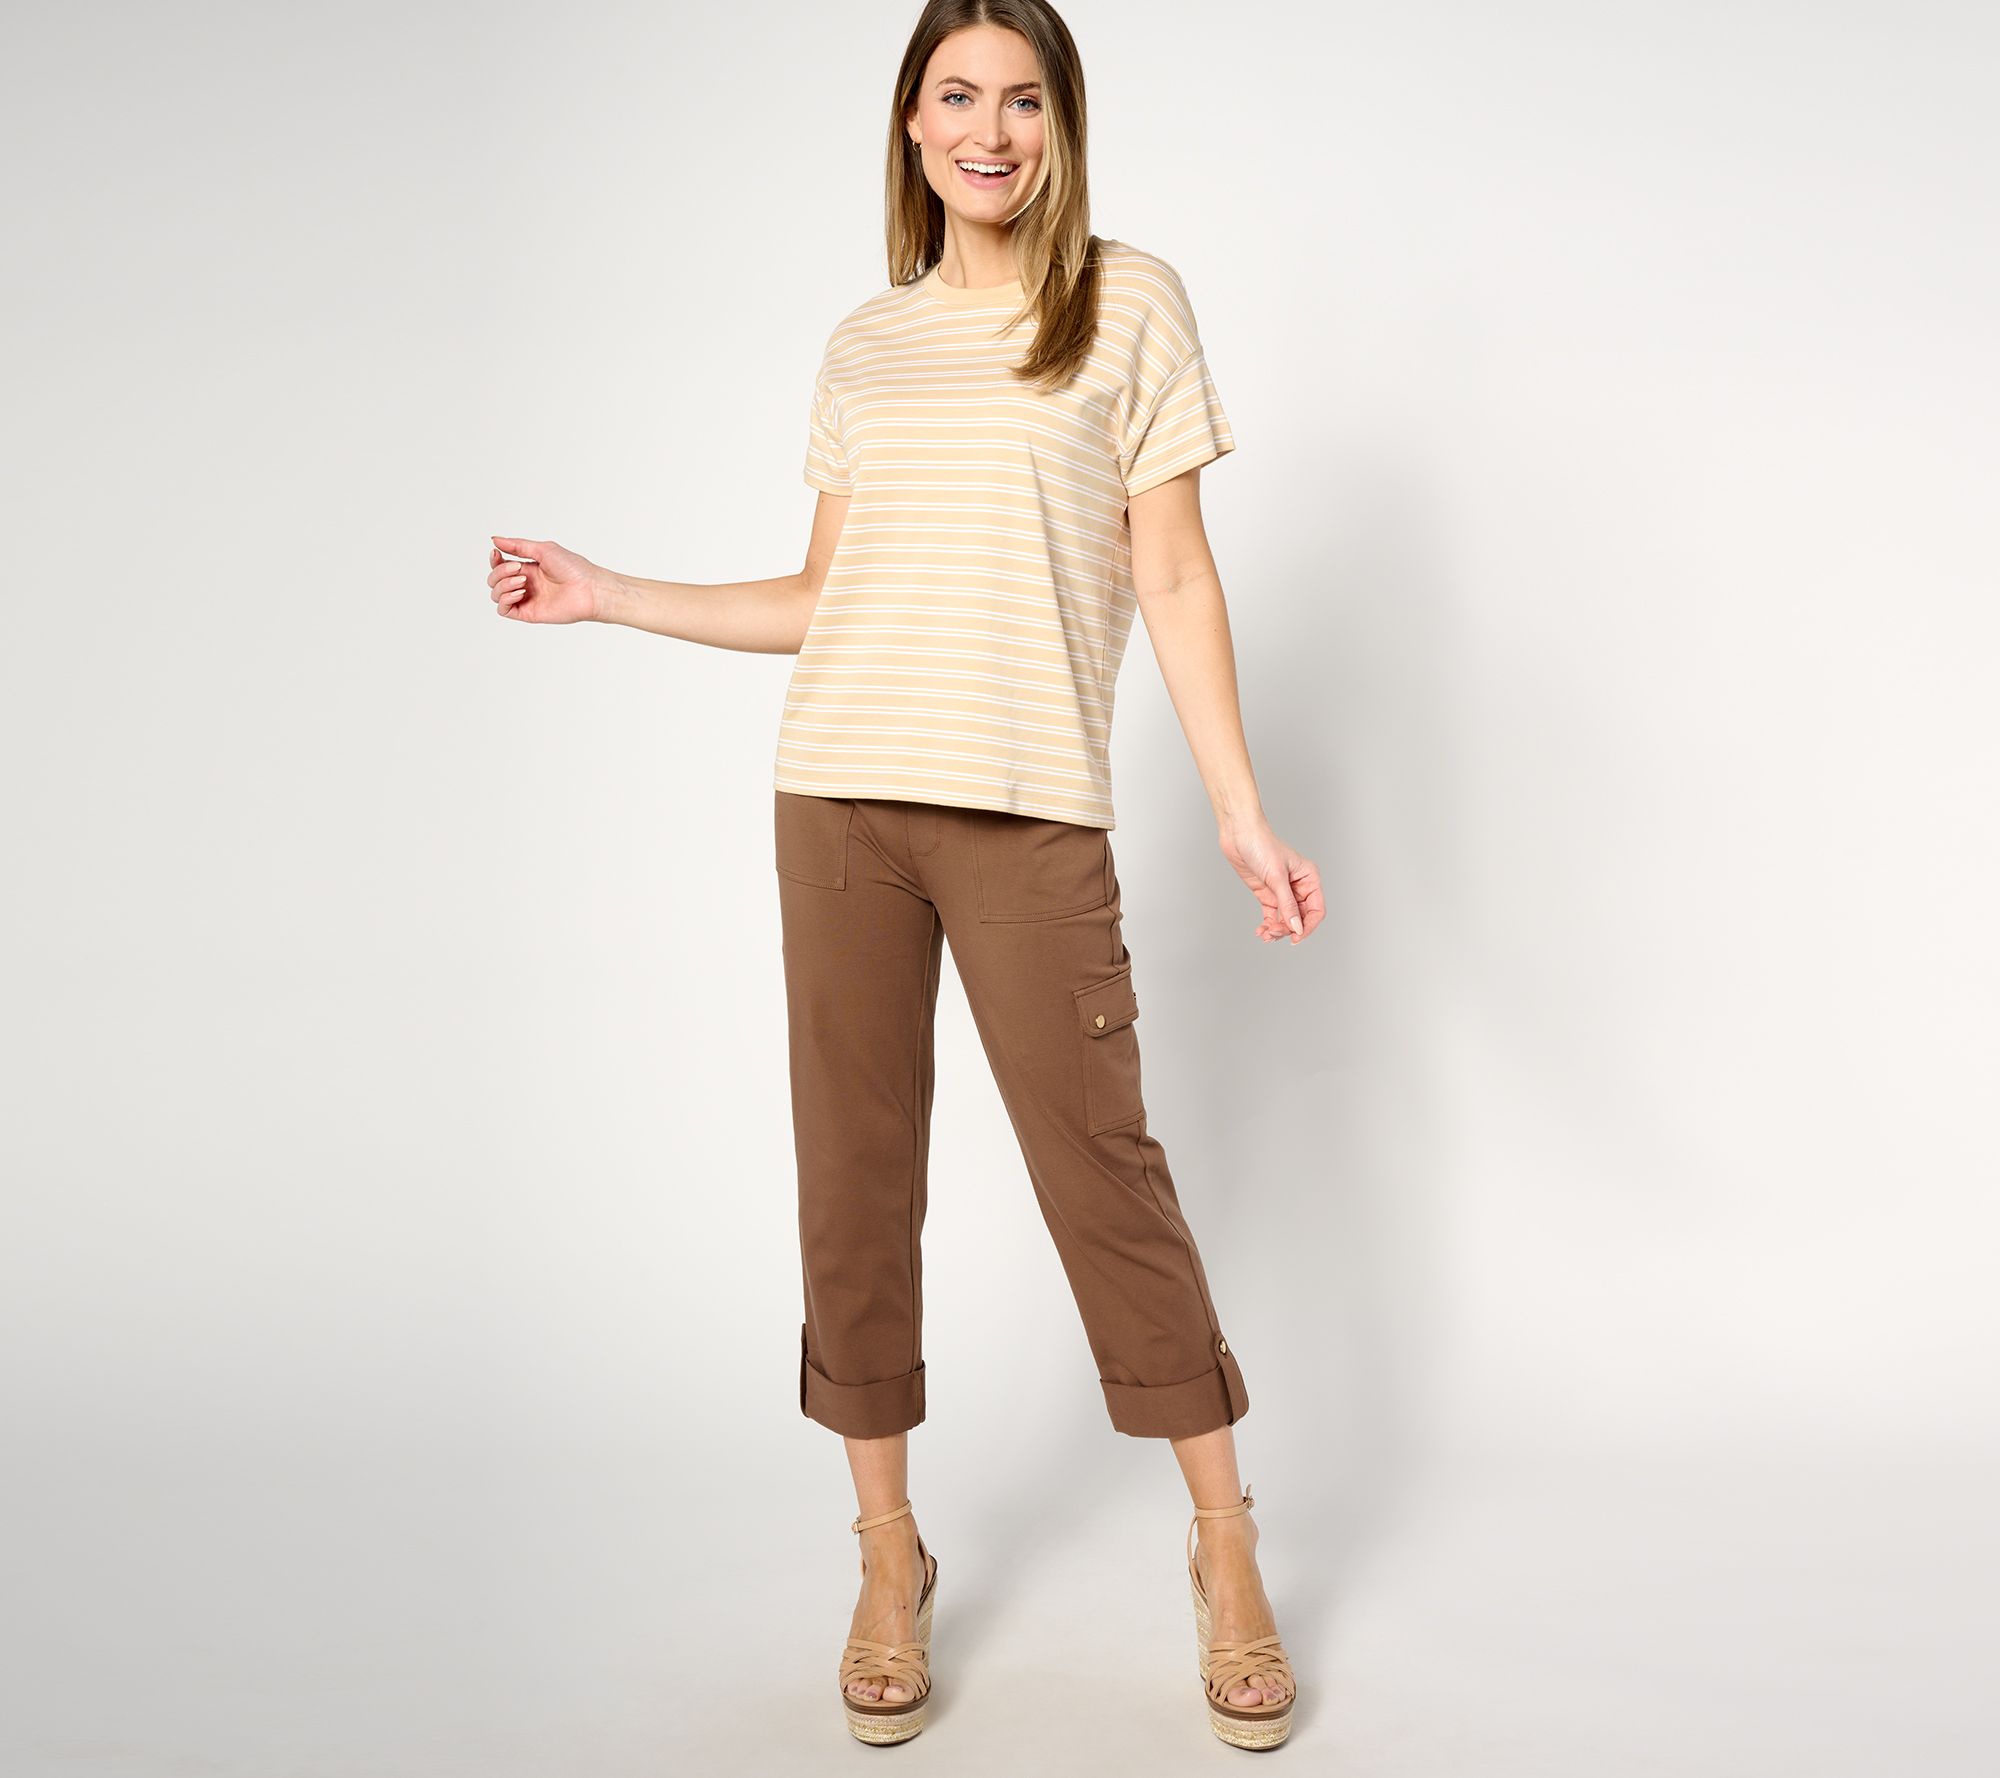 Susan Graver Weekend Premium Stretch Pull-On Capri Leggings-US  Large(36-40), Women's Fashion, Bottoms, Other Bottoms on Carousell